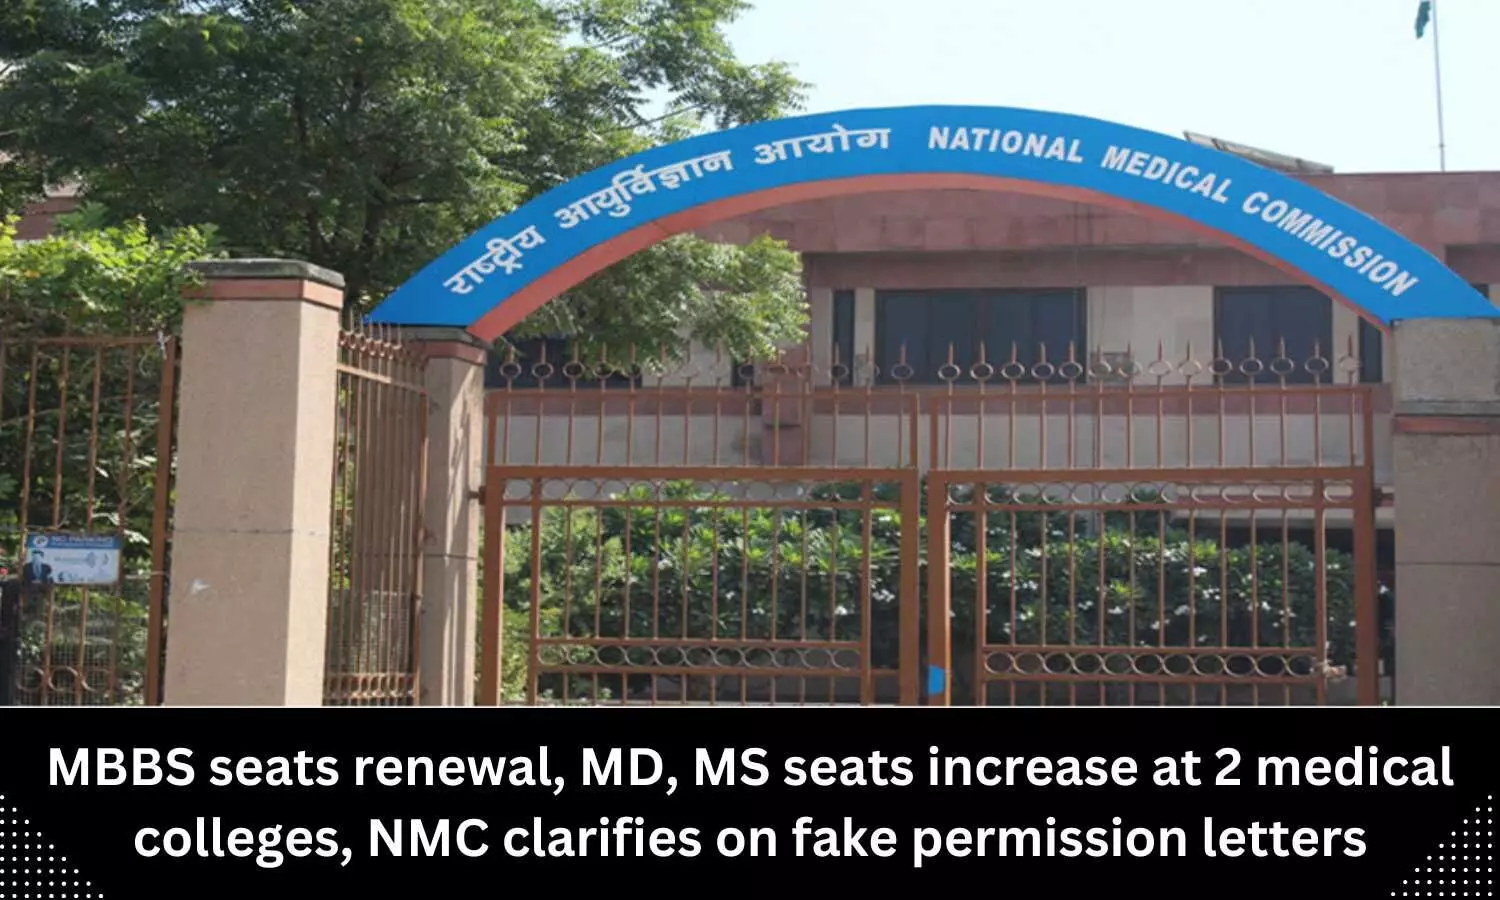 Fact Check: MBBS seats renewal, MS, MD seats increase at 2 medical colleges, NMC clarifies on fake permission letters